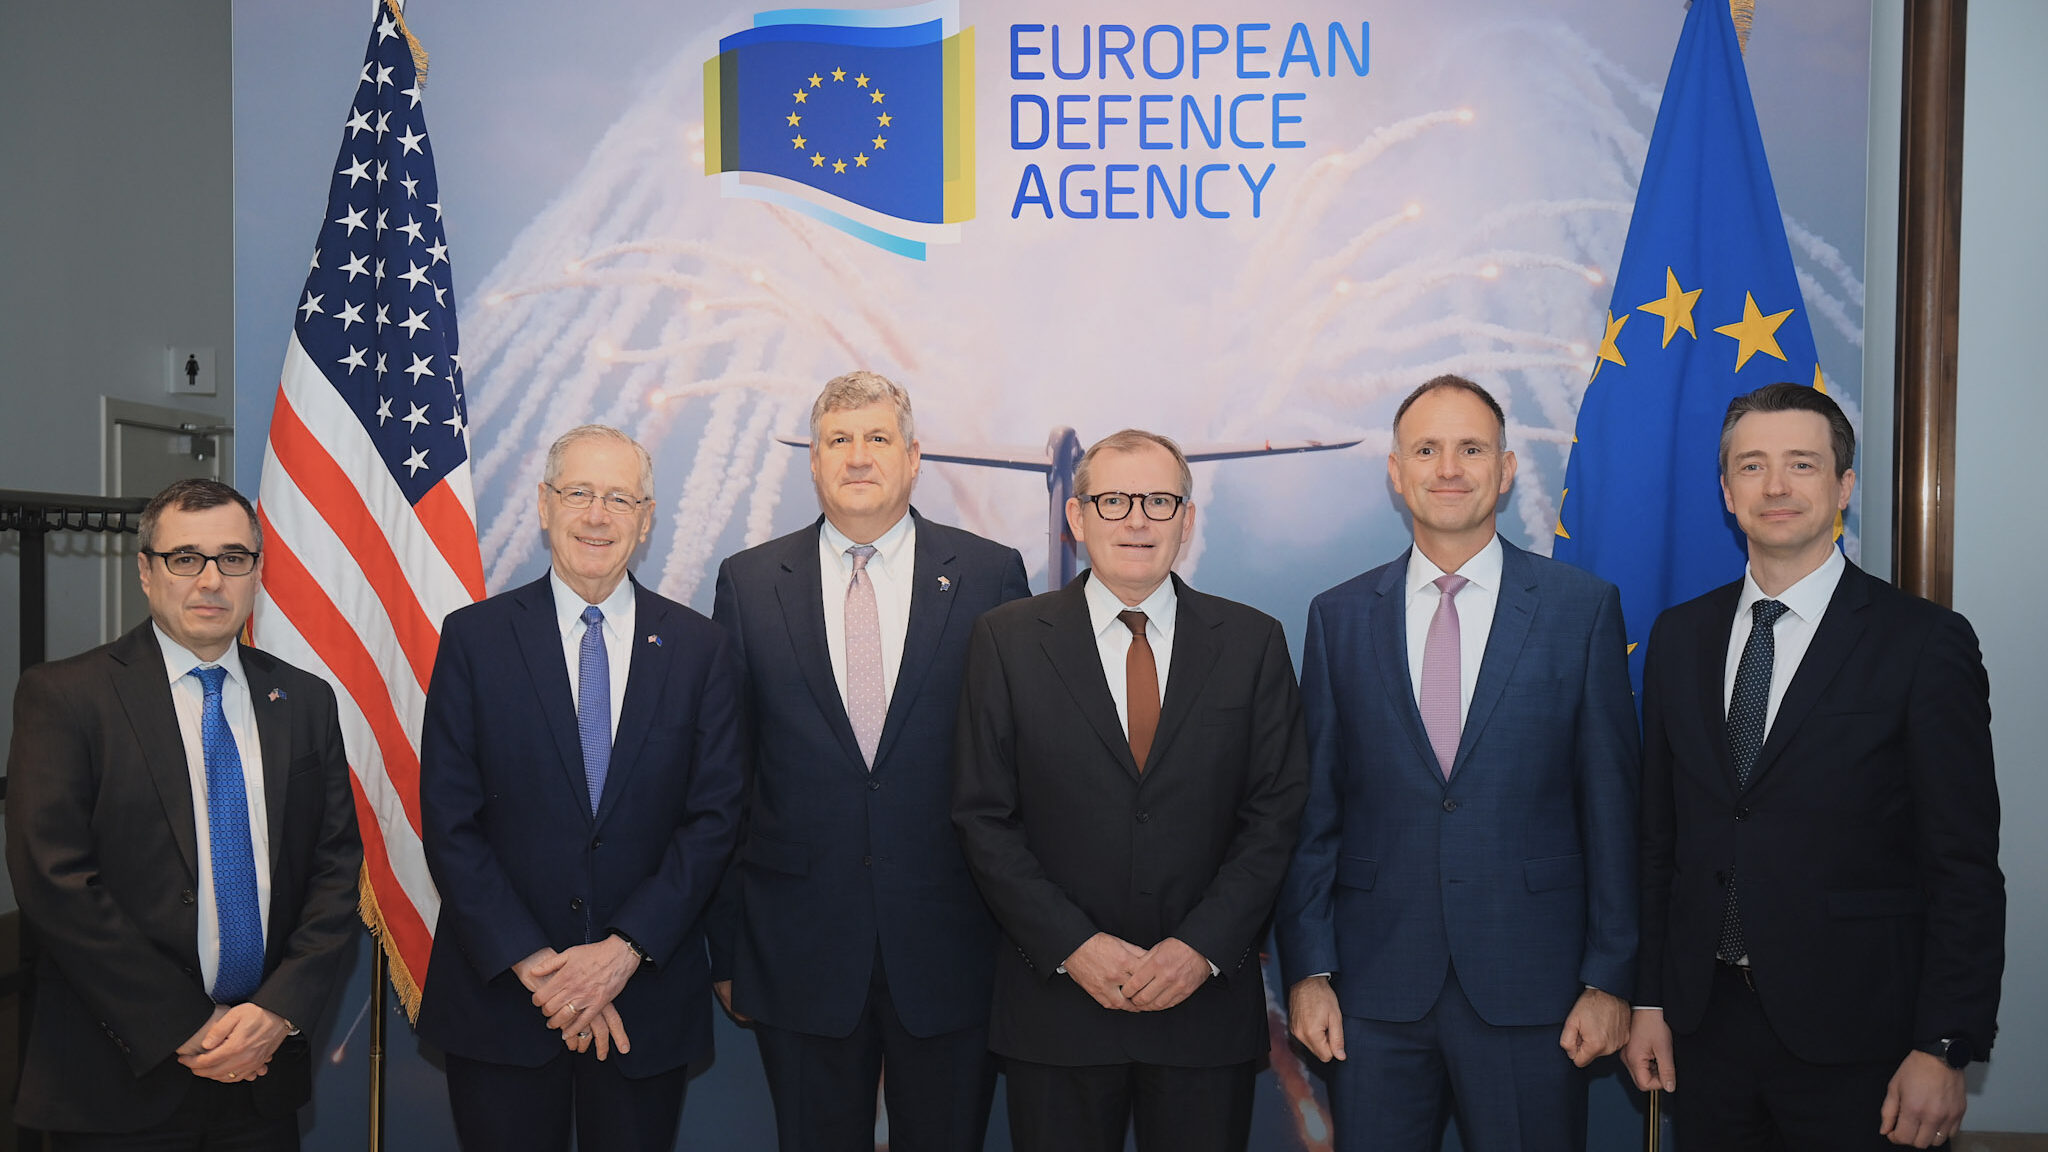 DoD and European Defence Agency sign cooperation pact in support of shared military interests